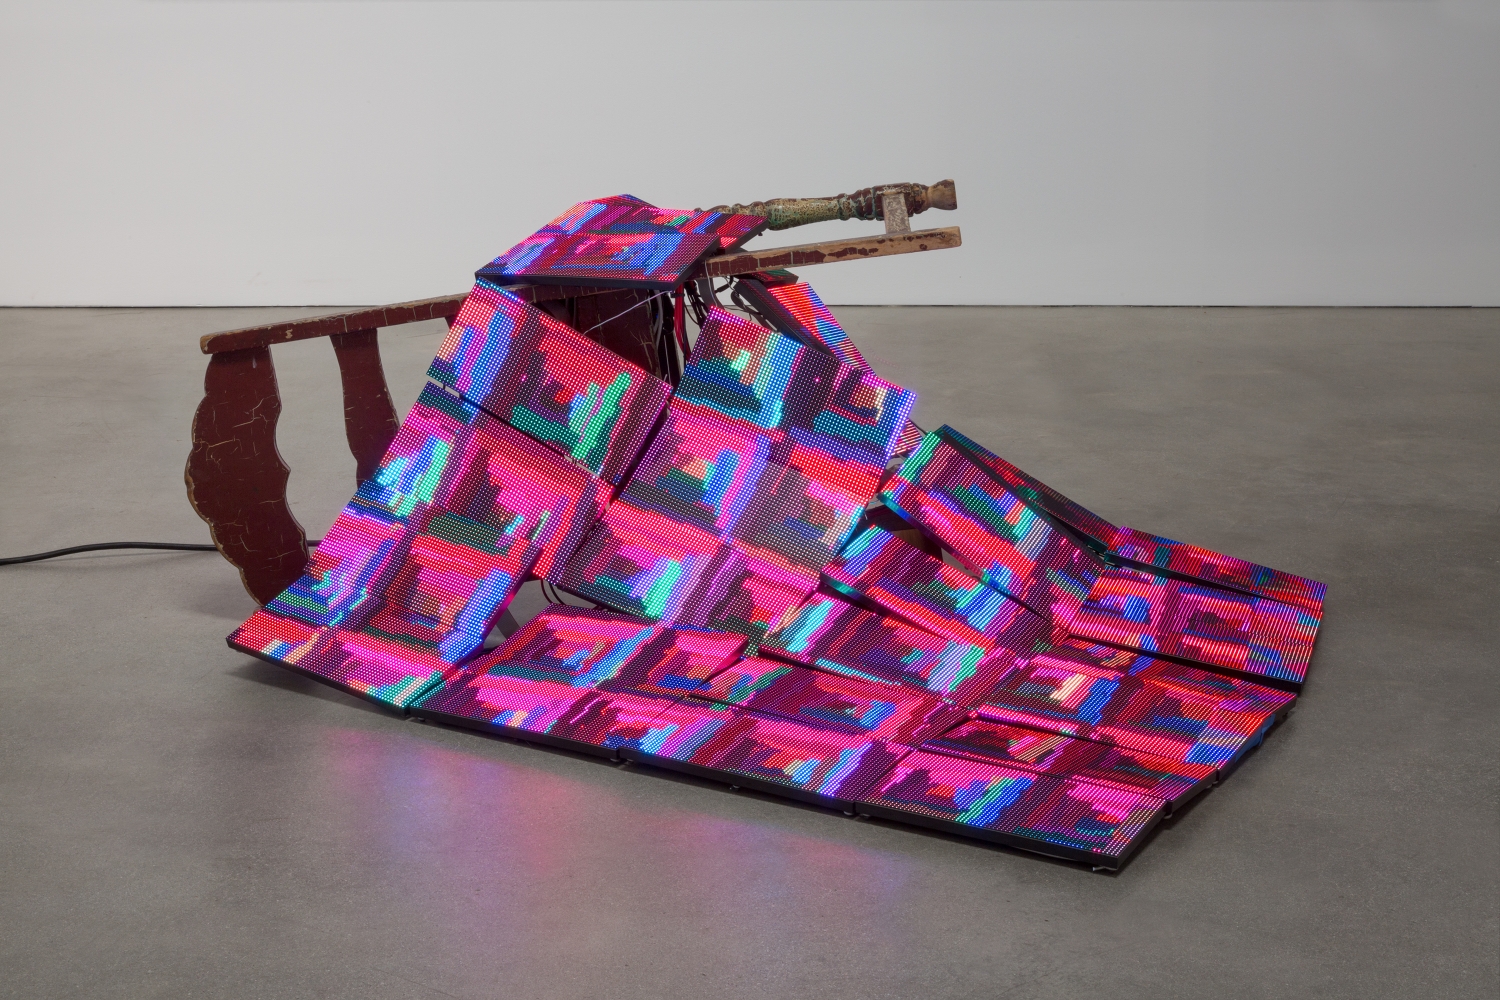 Luke Murphy, "Quilt and Discarded Chair," 2020